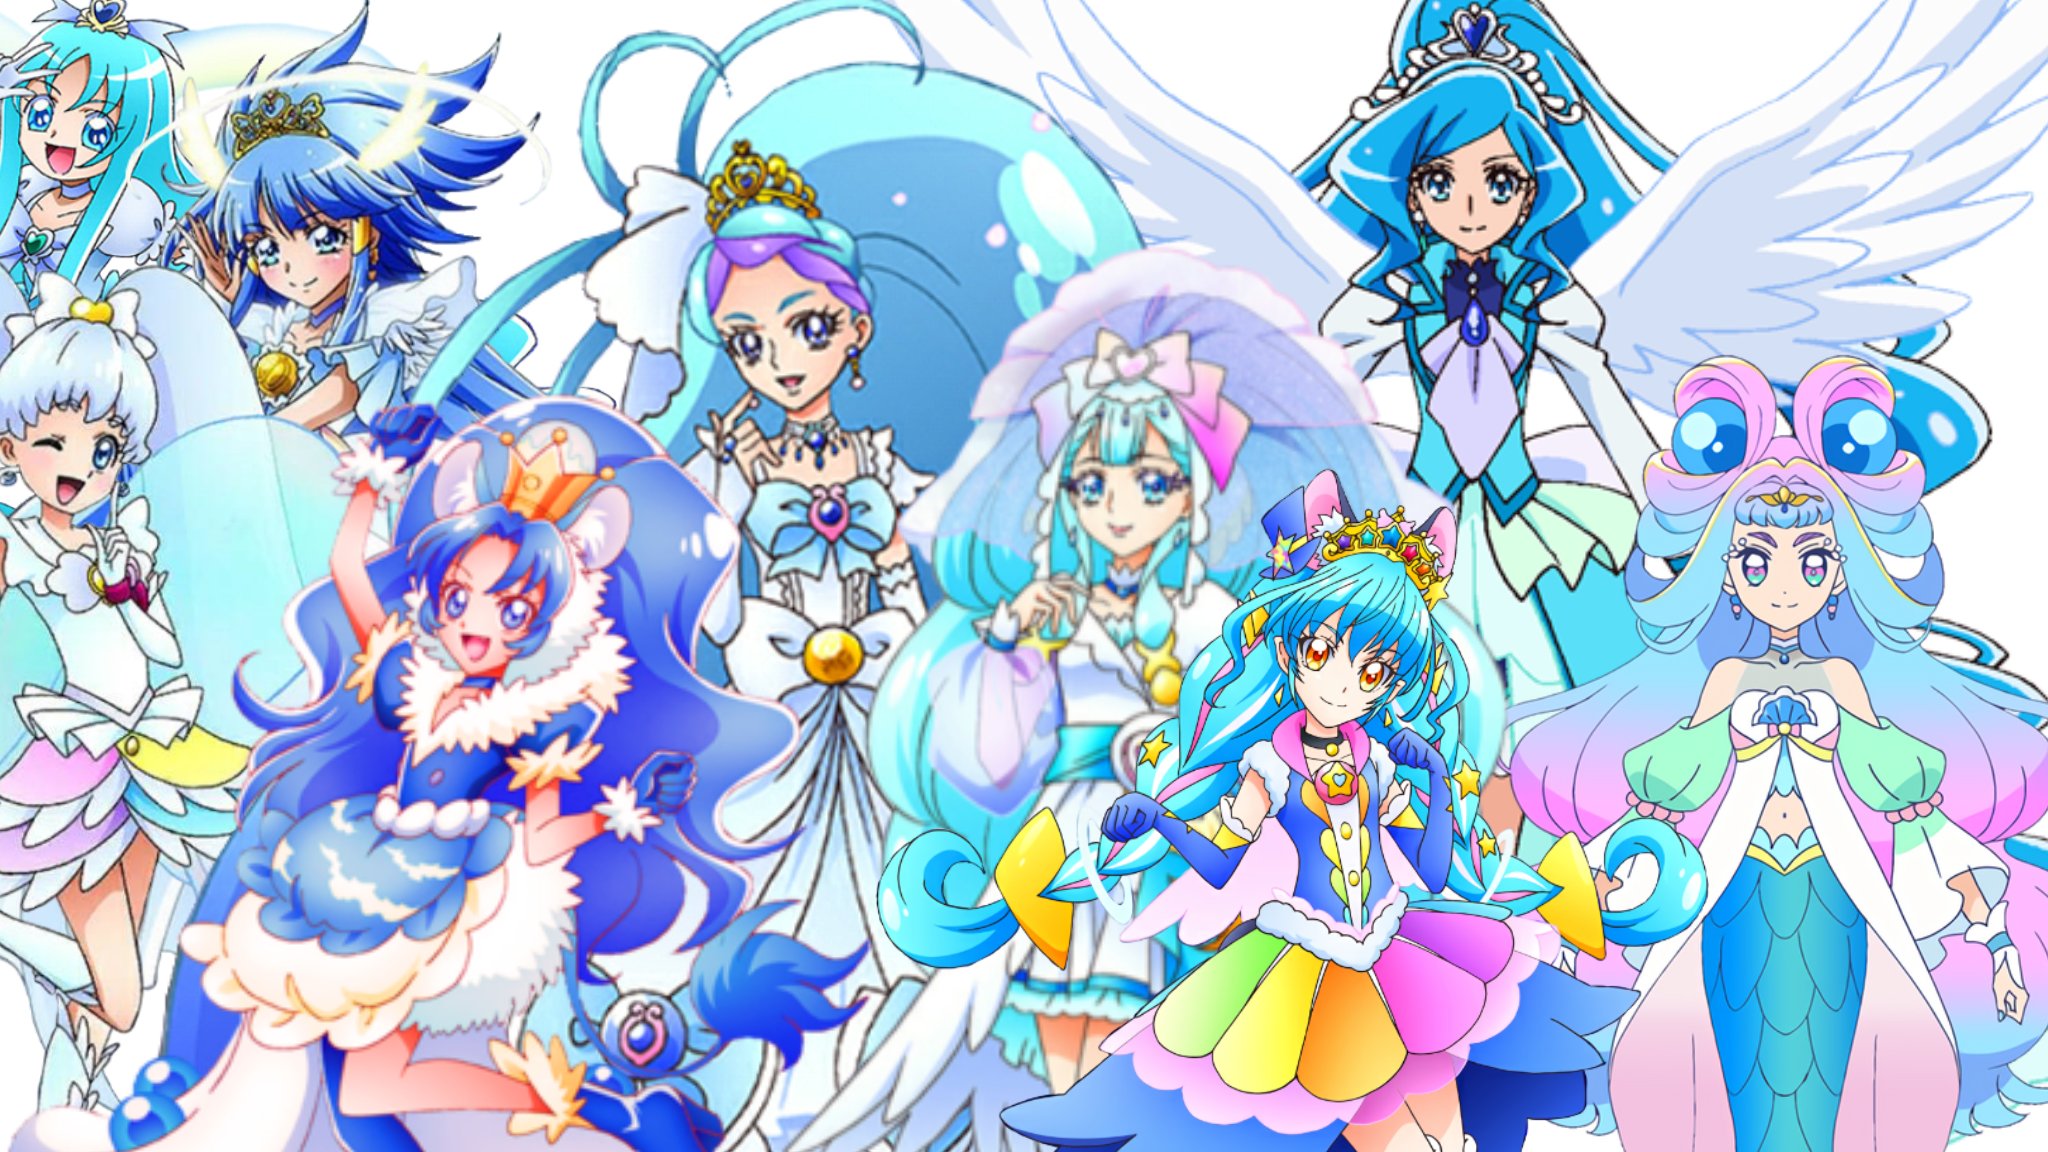 KuroYami on X: Green/Teal Precures from another world! Who's your